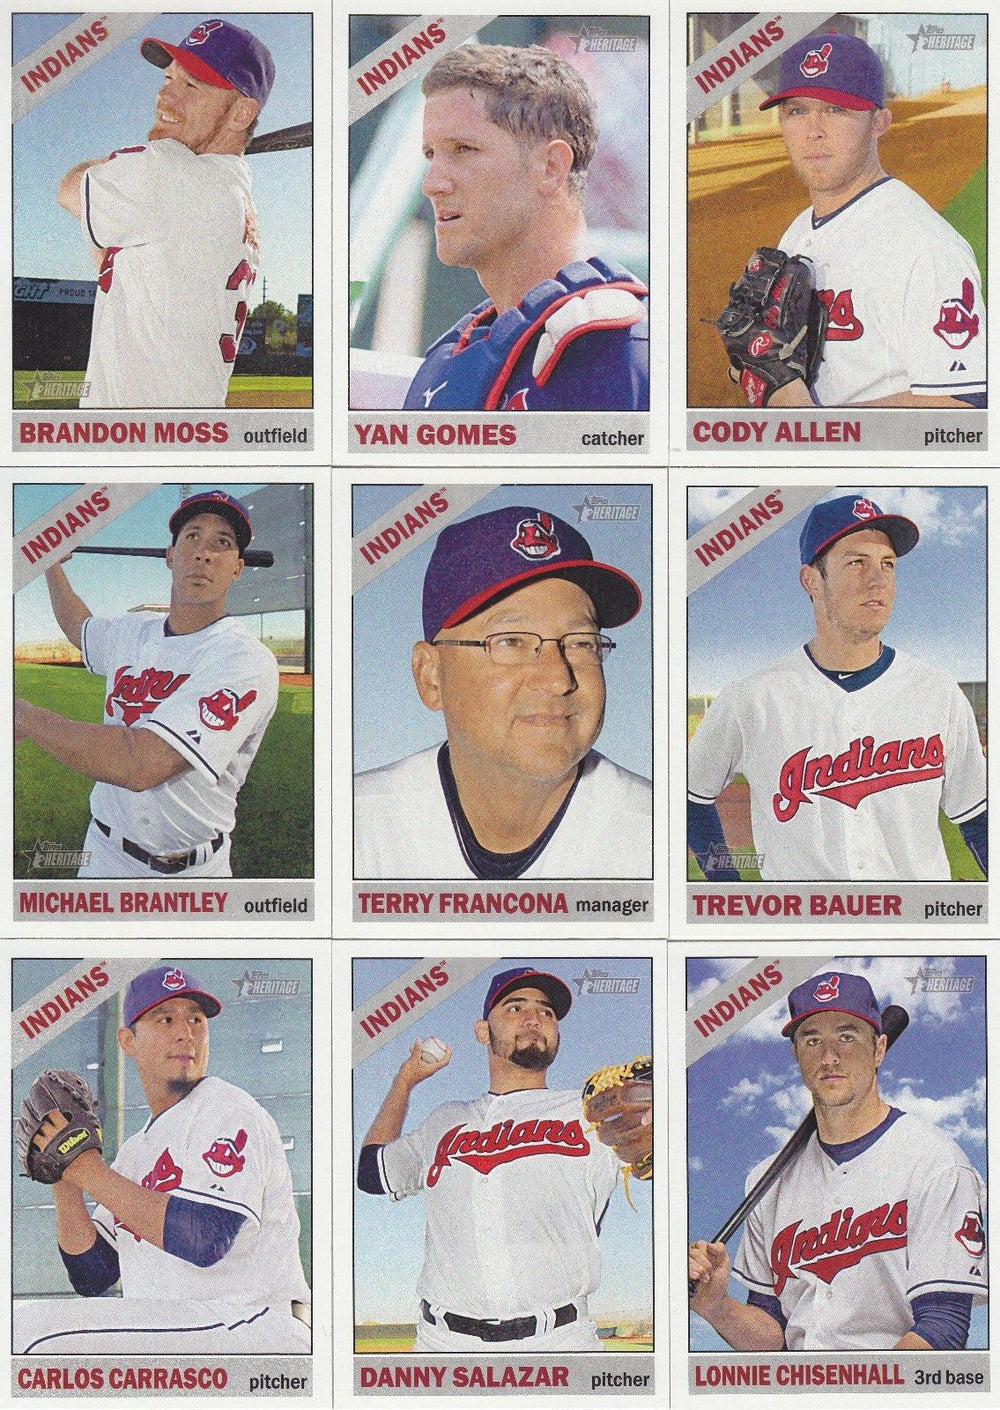 Cleveland Indians 2015 Topps HERITAGE Team Set with Nick Swisher and Terry Francona Plus